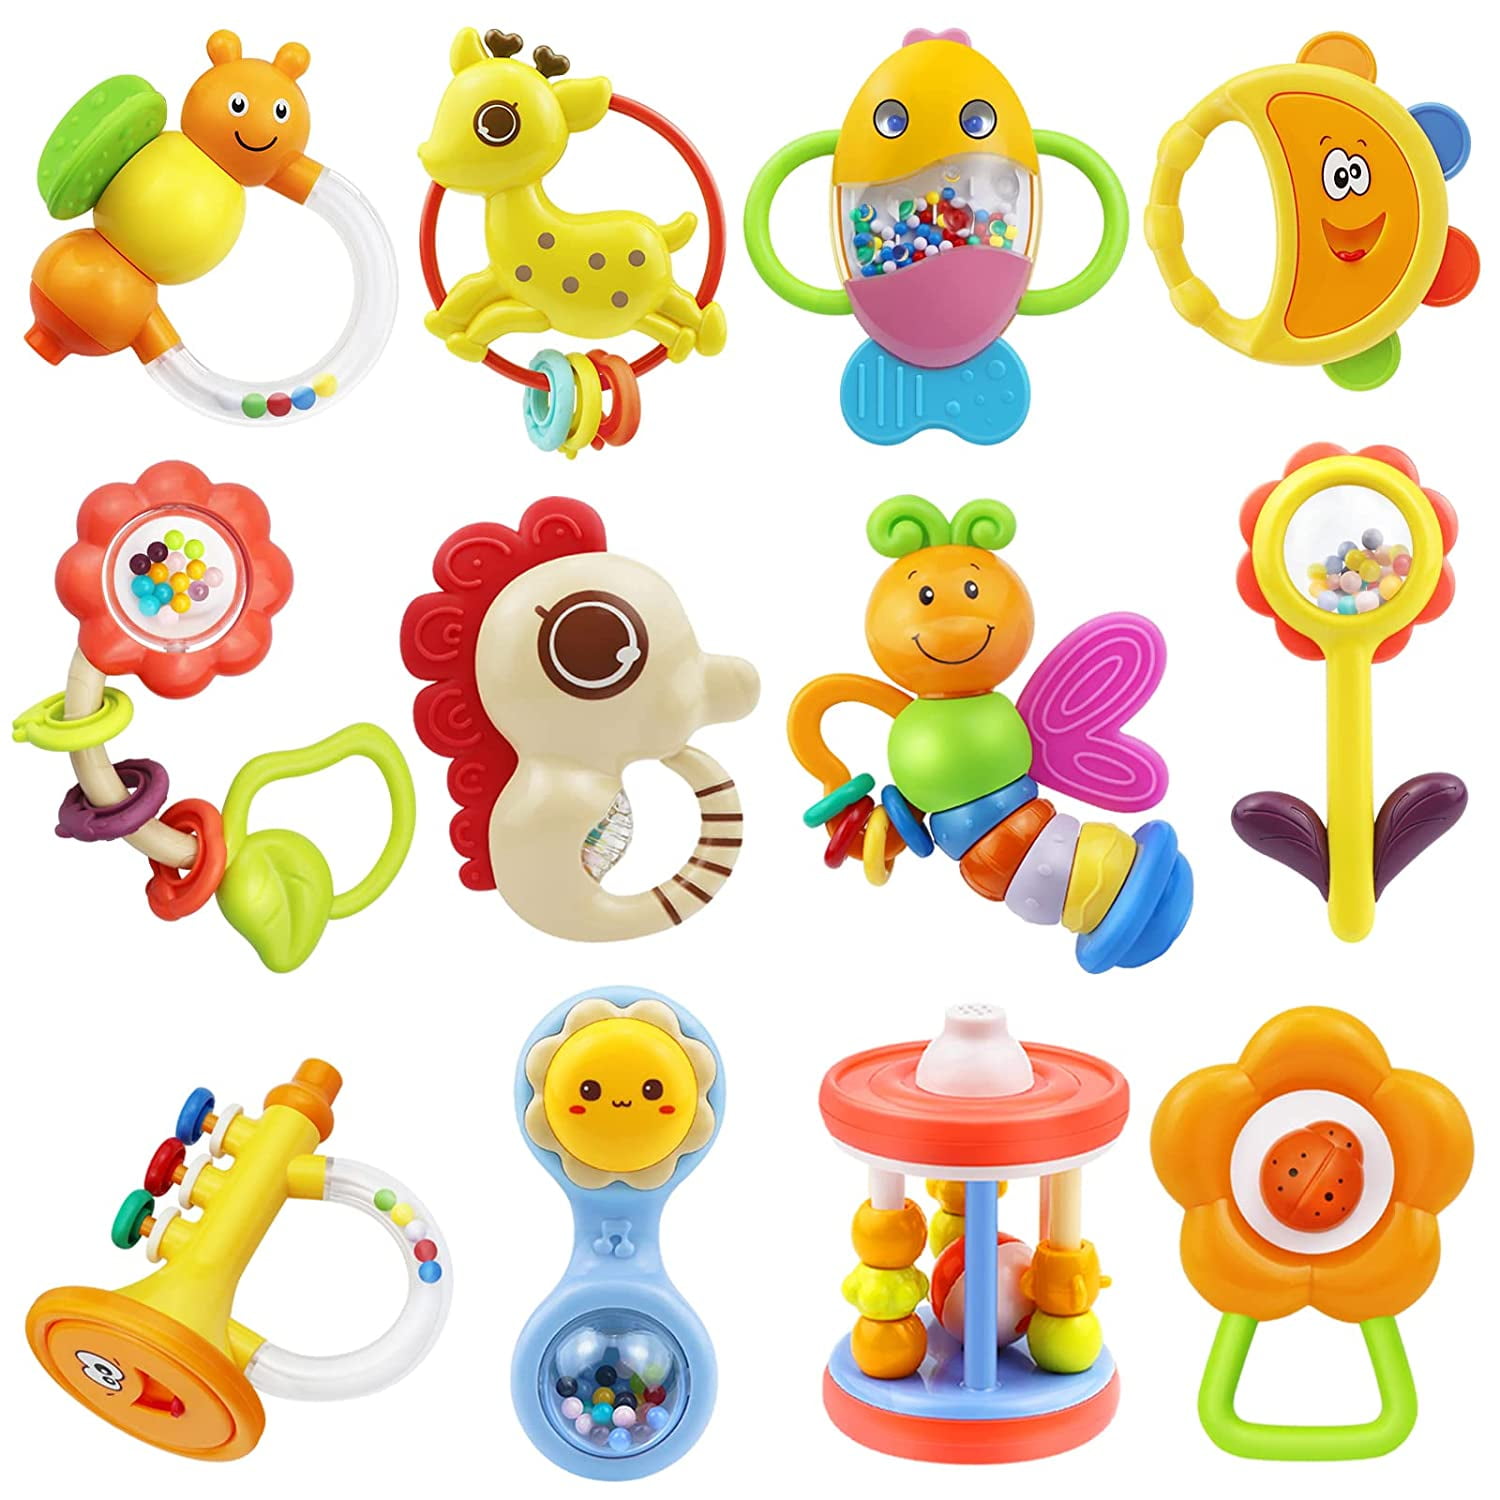 7Pcs/set Baby Rattles Toys Teethers Set Grab Spin Shaking Bell Rattle Gift Toy 